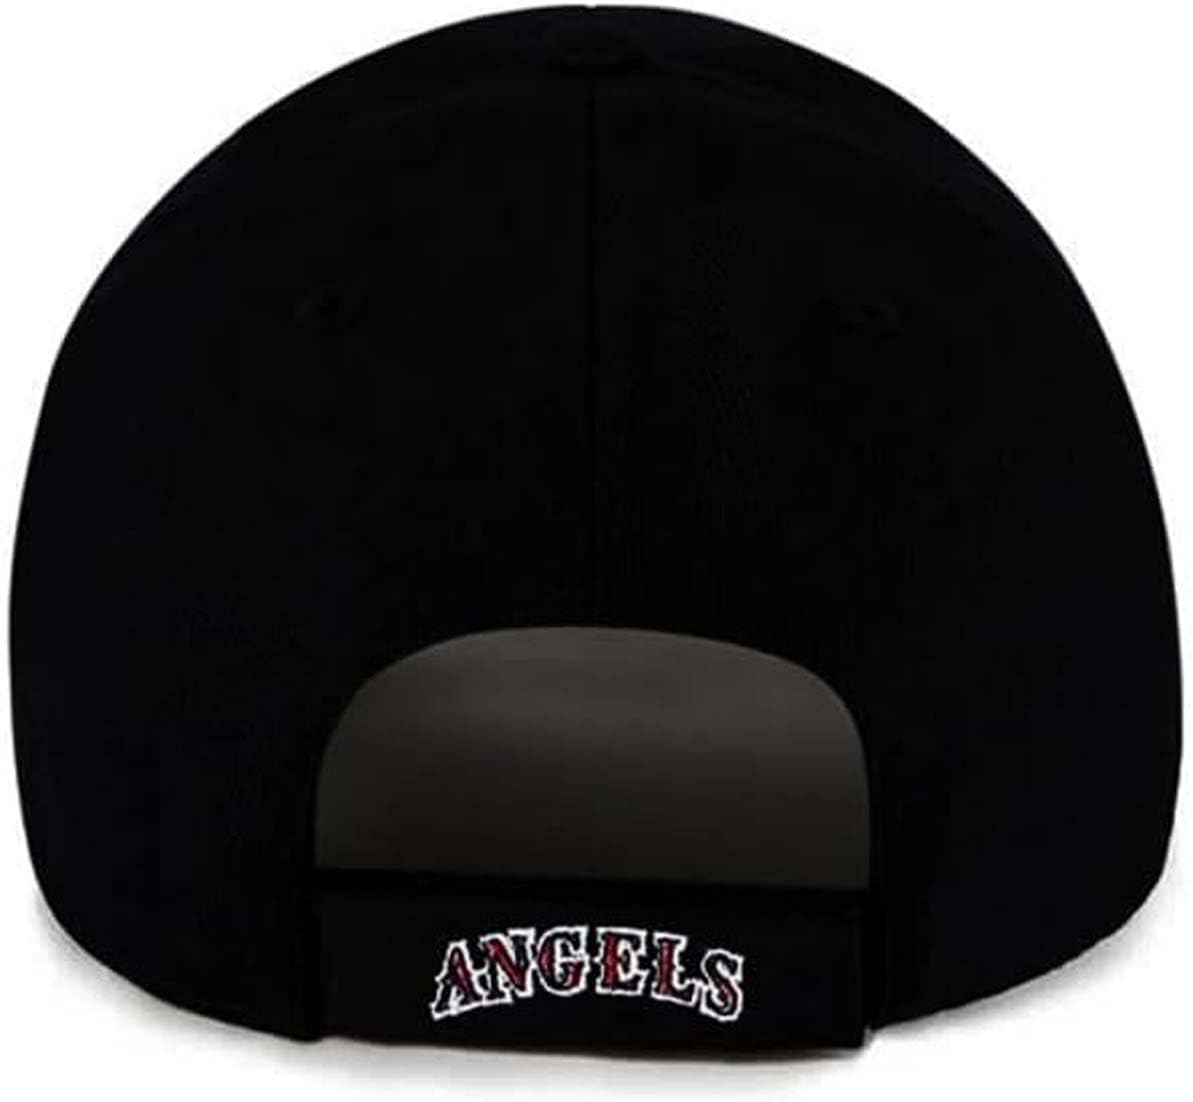 New Era 100% Authentic Exclusive Los Angeles Angels of Anaheim Snapback 9Fifty Cap Hat Adjustable One Size Fit Most (CA 47 Black & Team Logo Curved Bill) - Caps Fitted Caps Fitted New Era